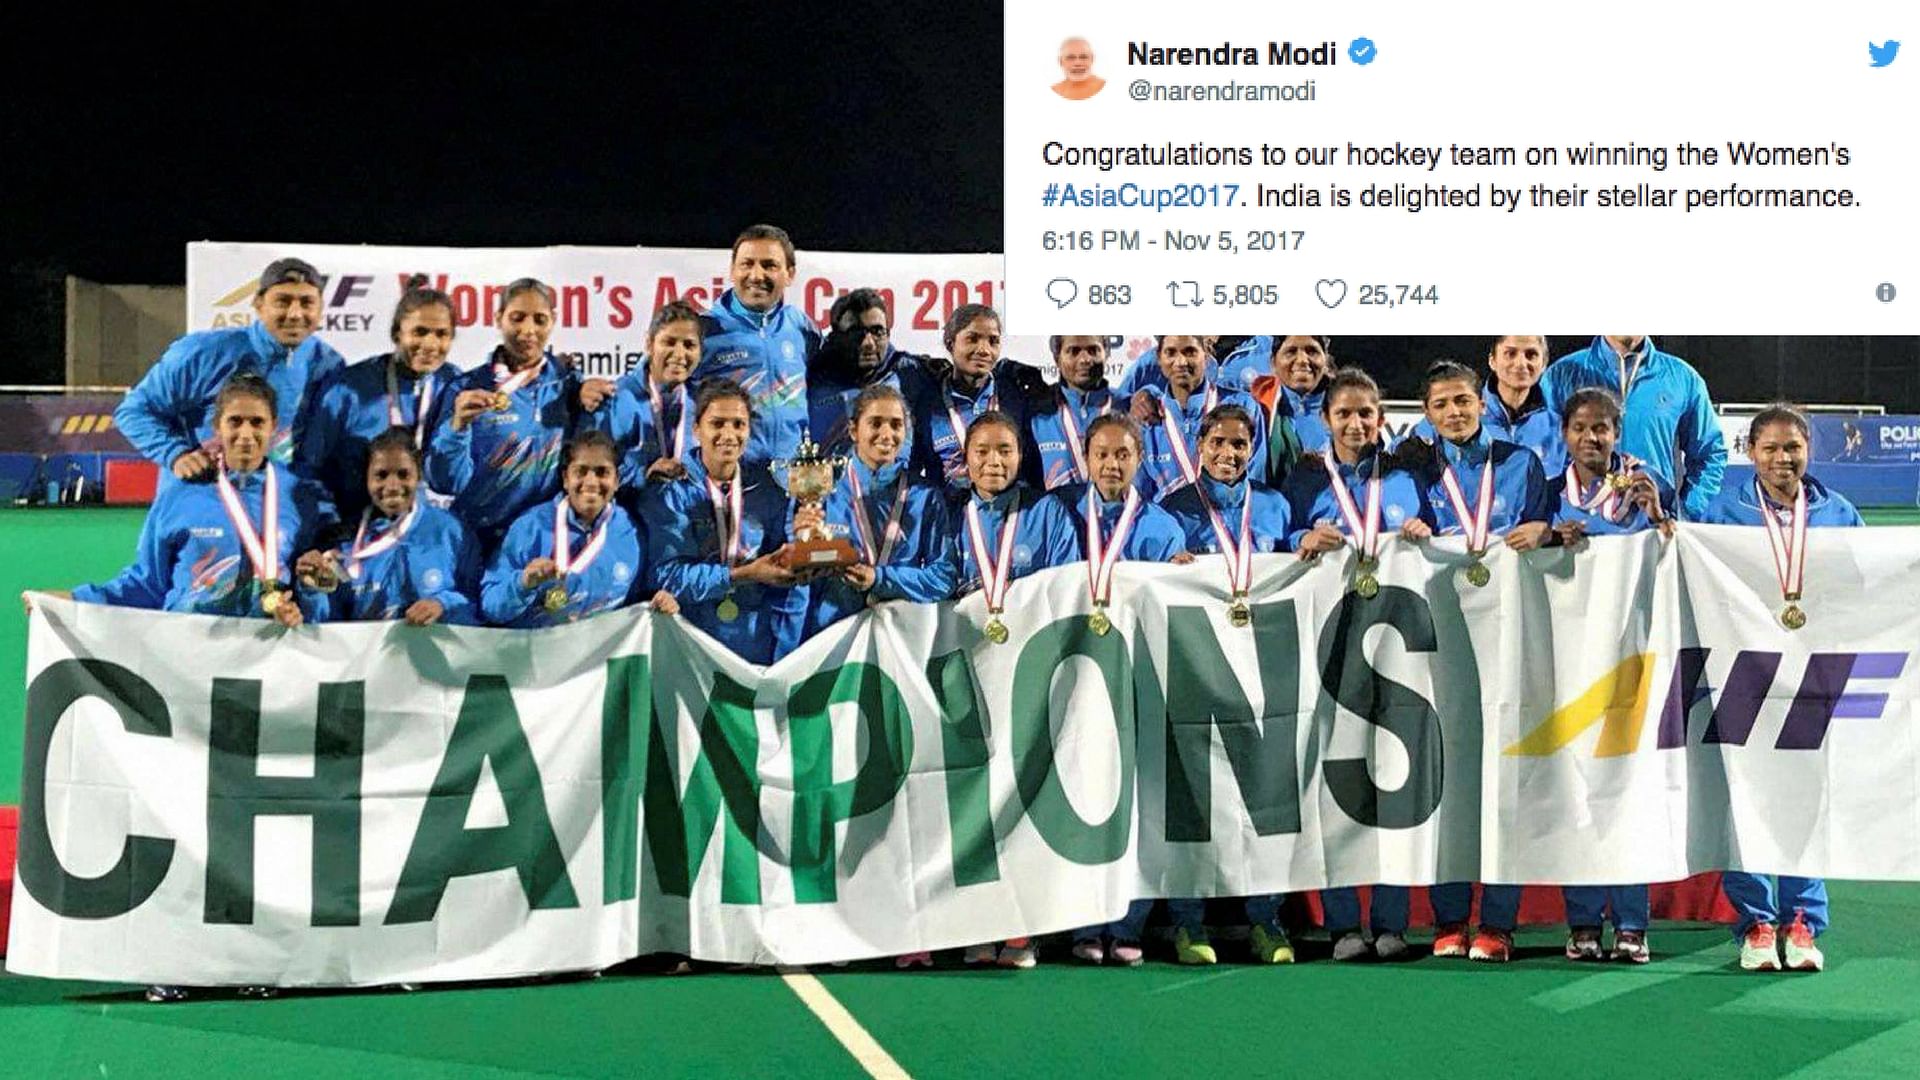 Indian women’s hockey team won the Asia Cup title on Sunday.